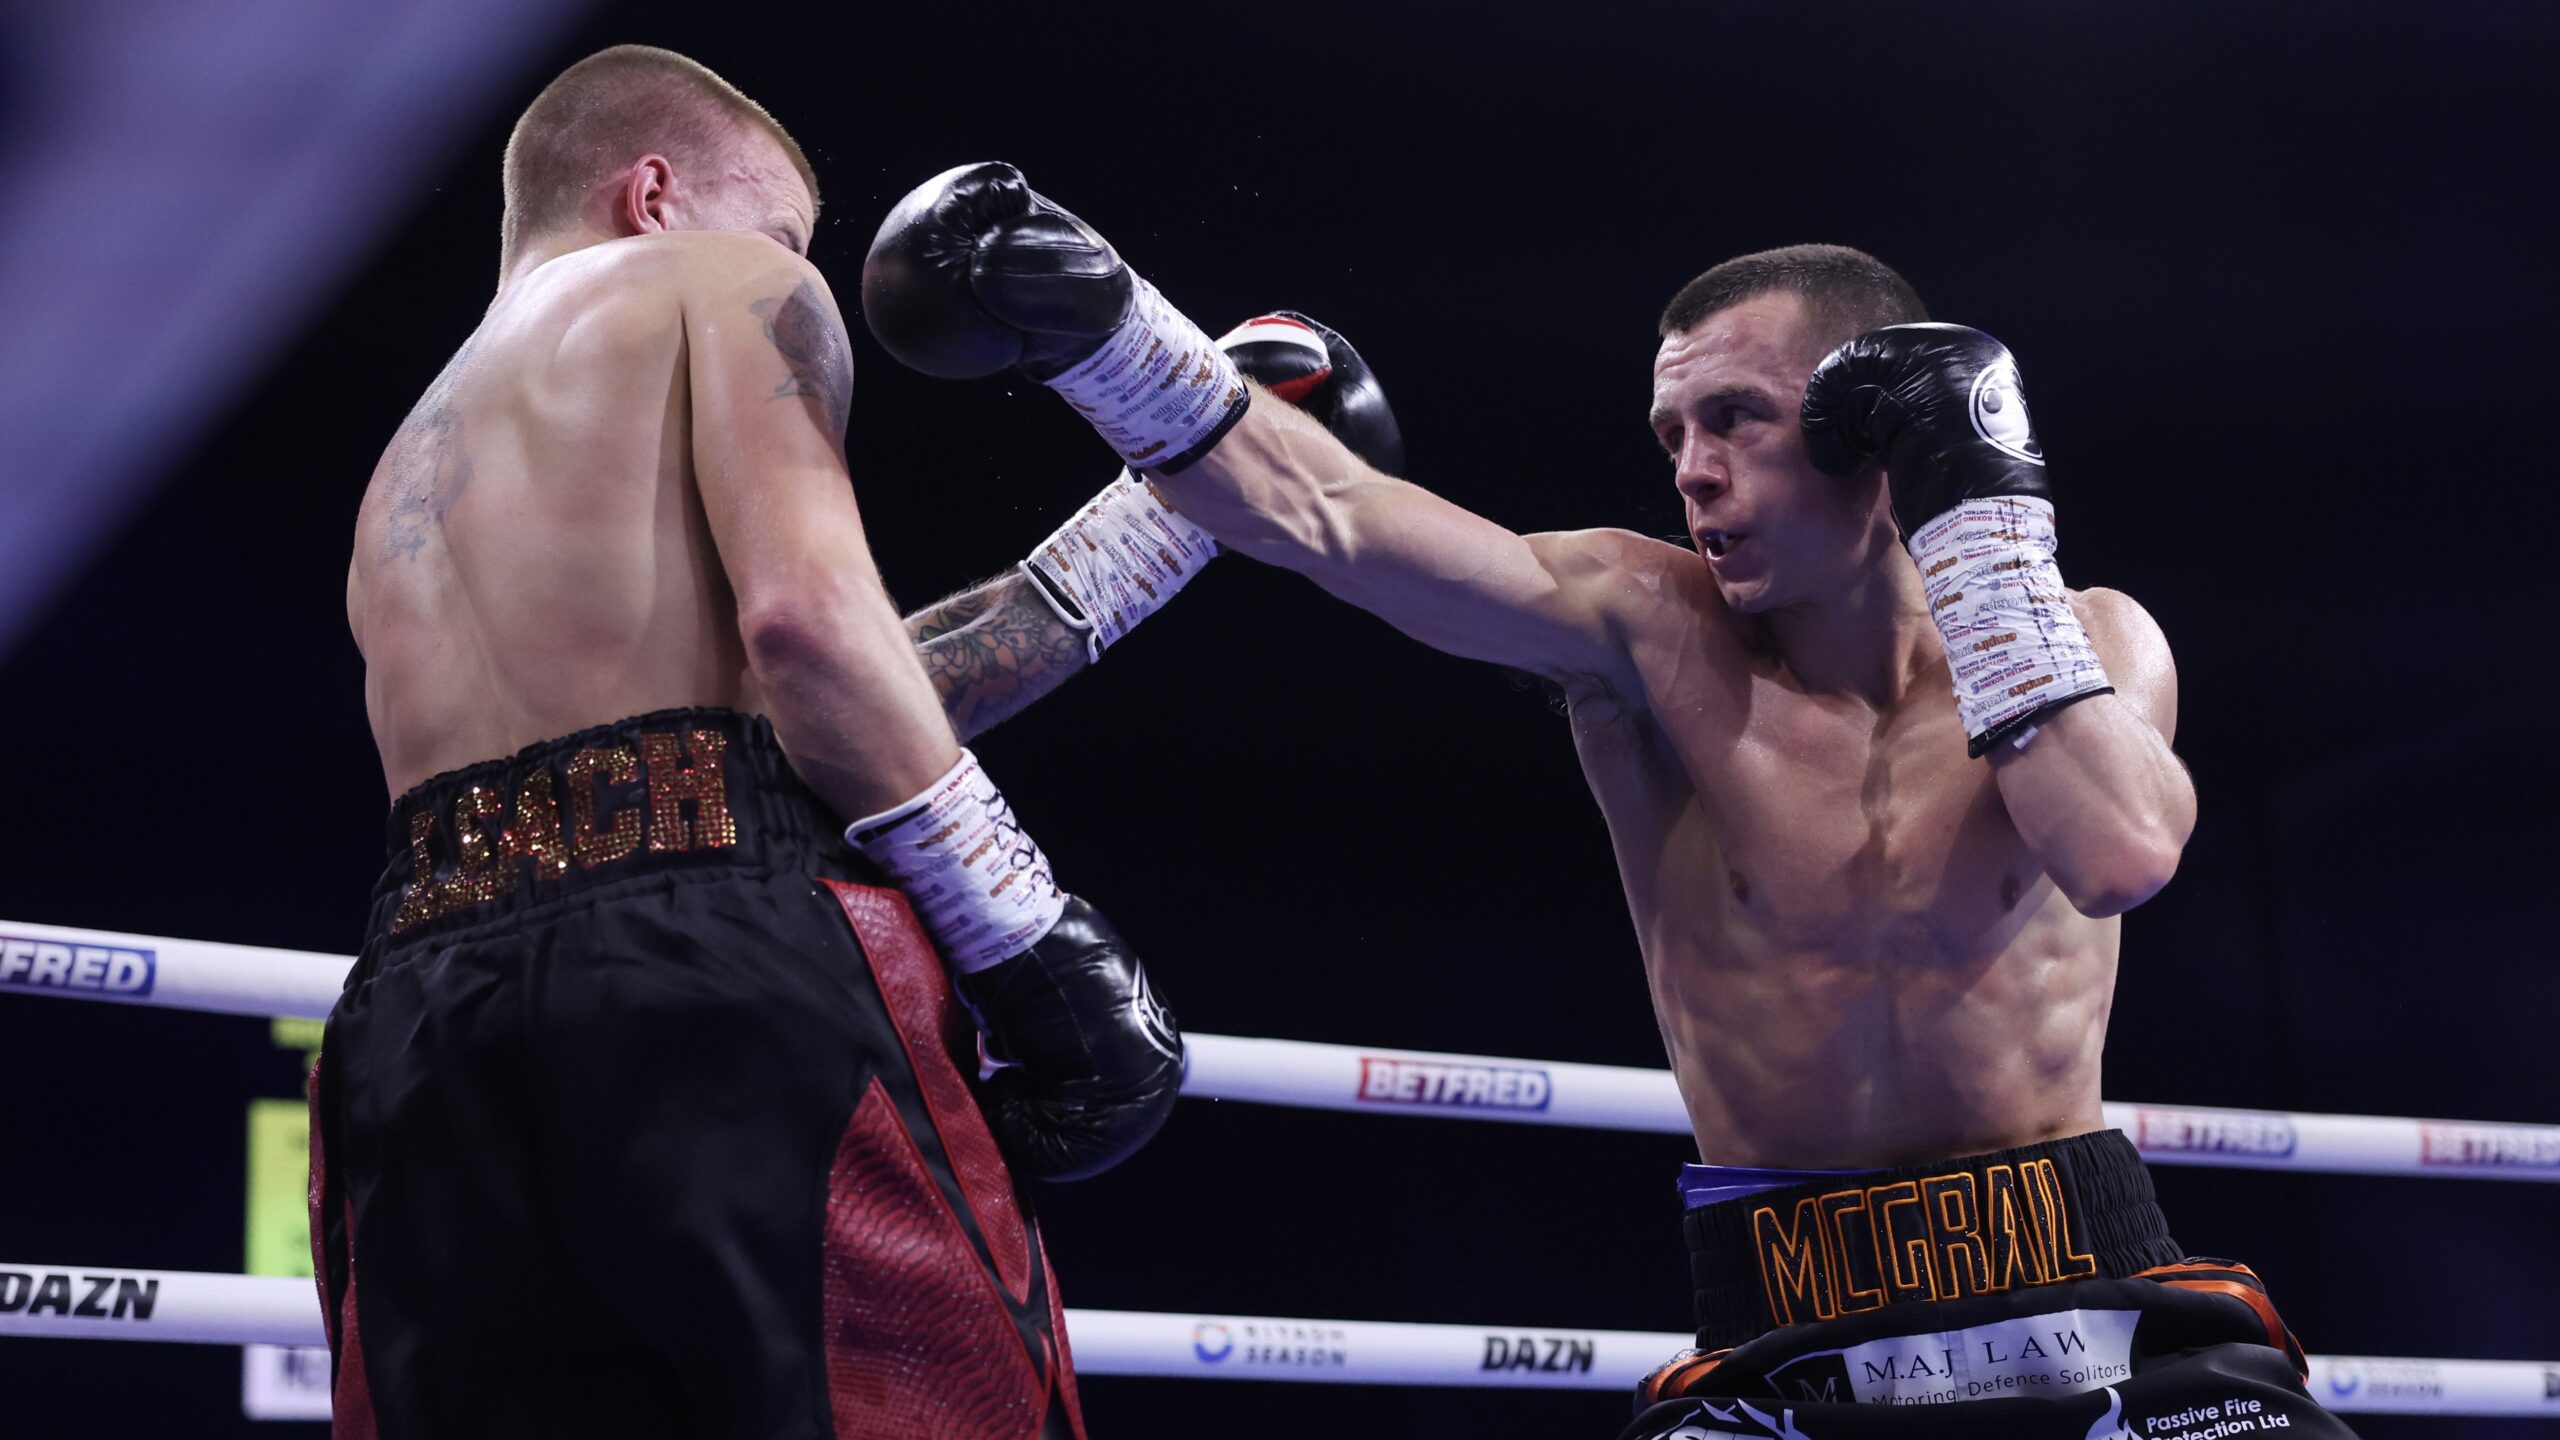 Peter McGrail bounces back after first loss to beat Marc Leach on points... is the Ja'Rico O'Quinn rematch next?